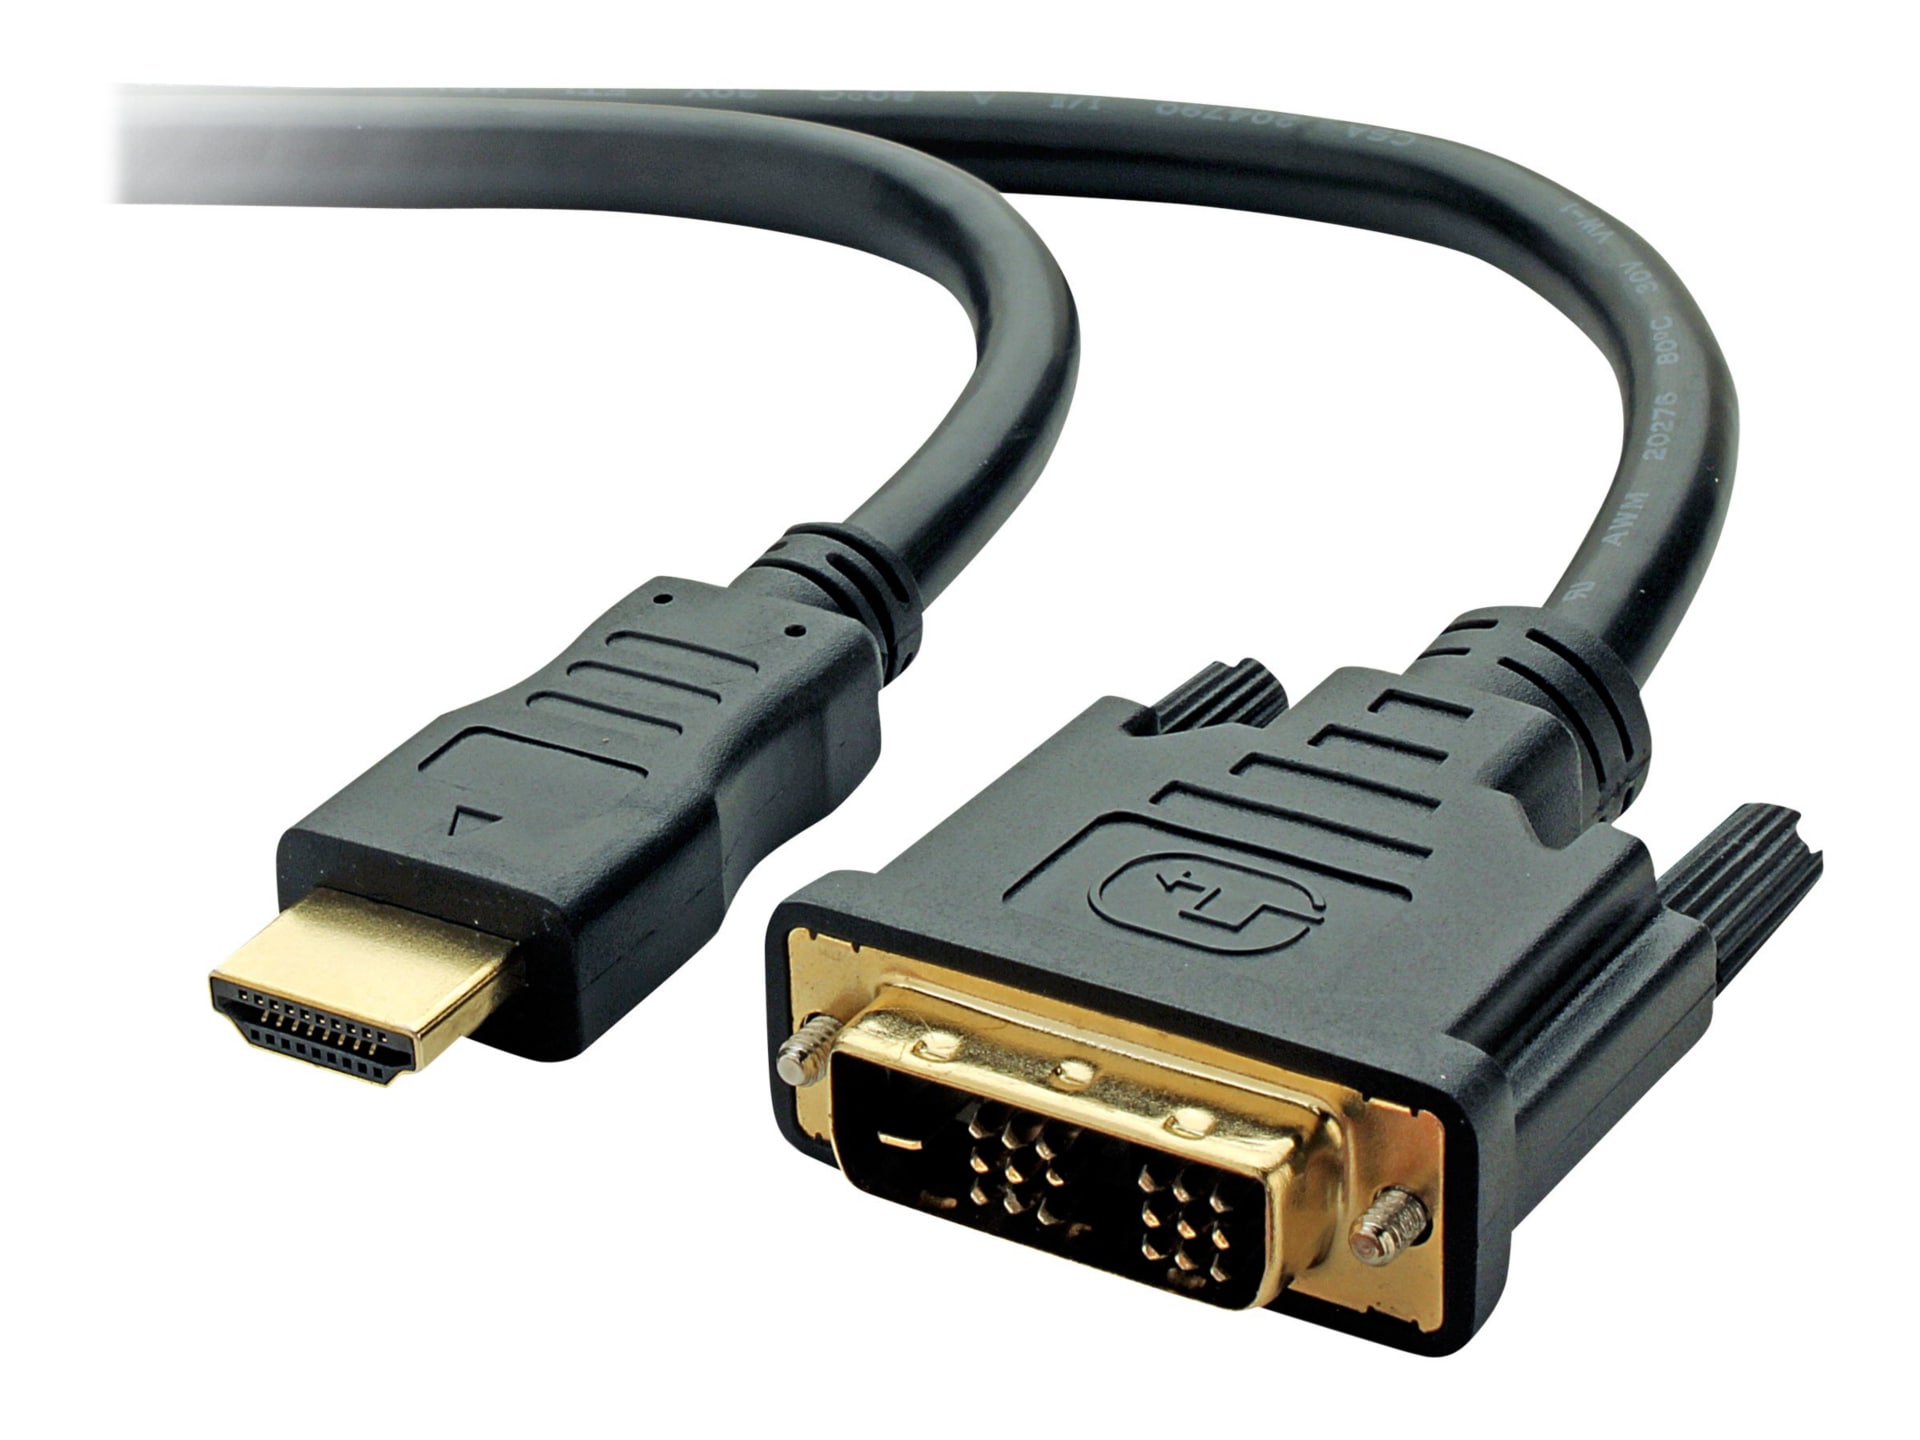 Belkin adapter cable - HDMI / DVI - 10 ft